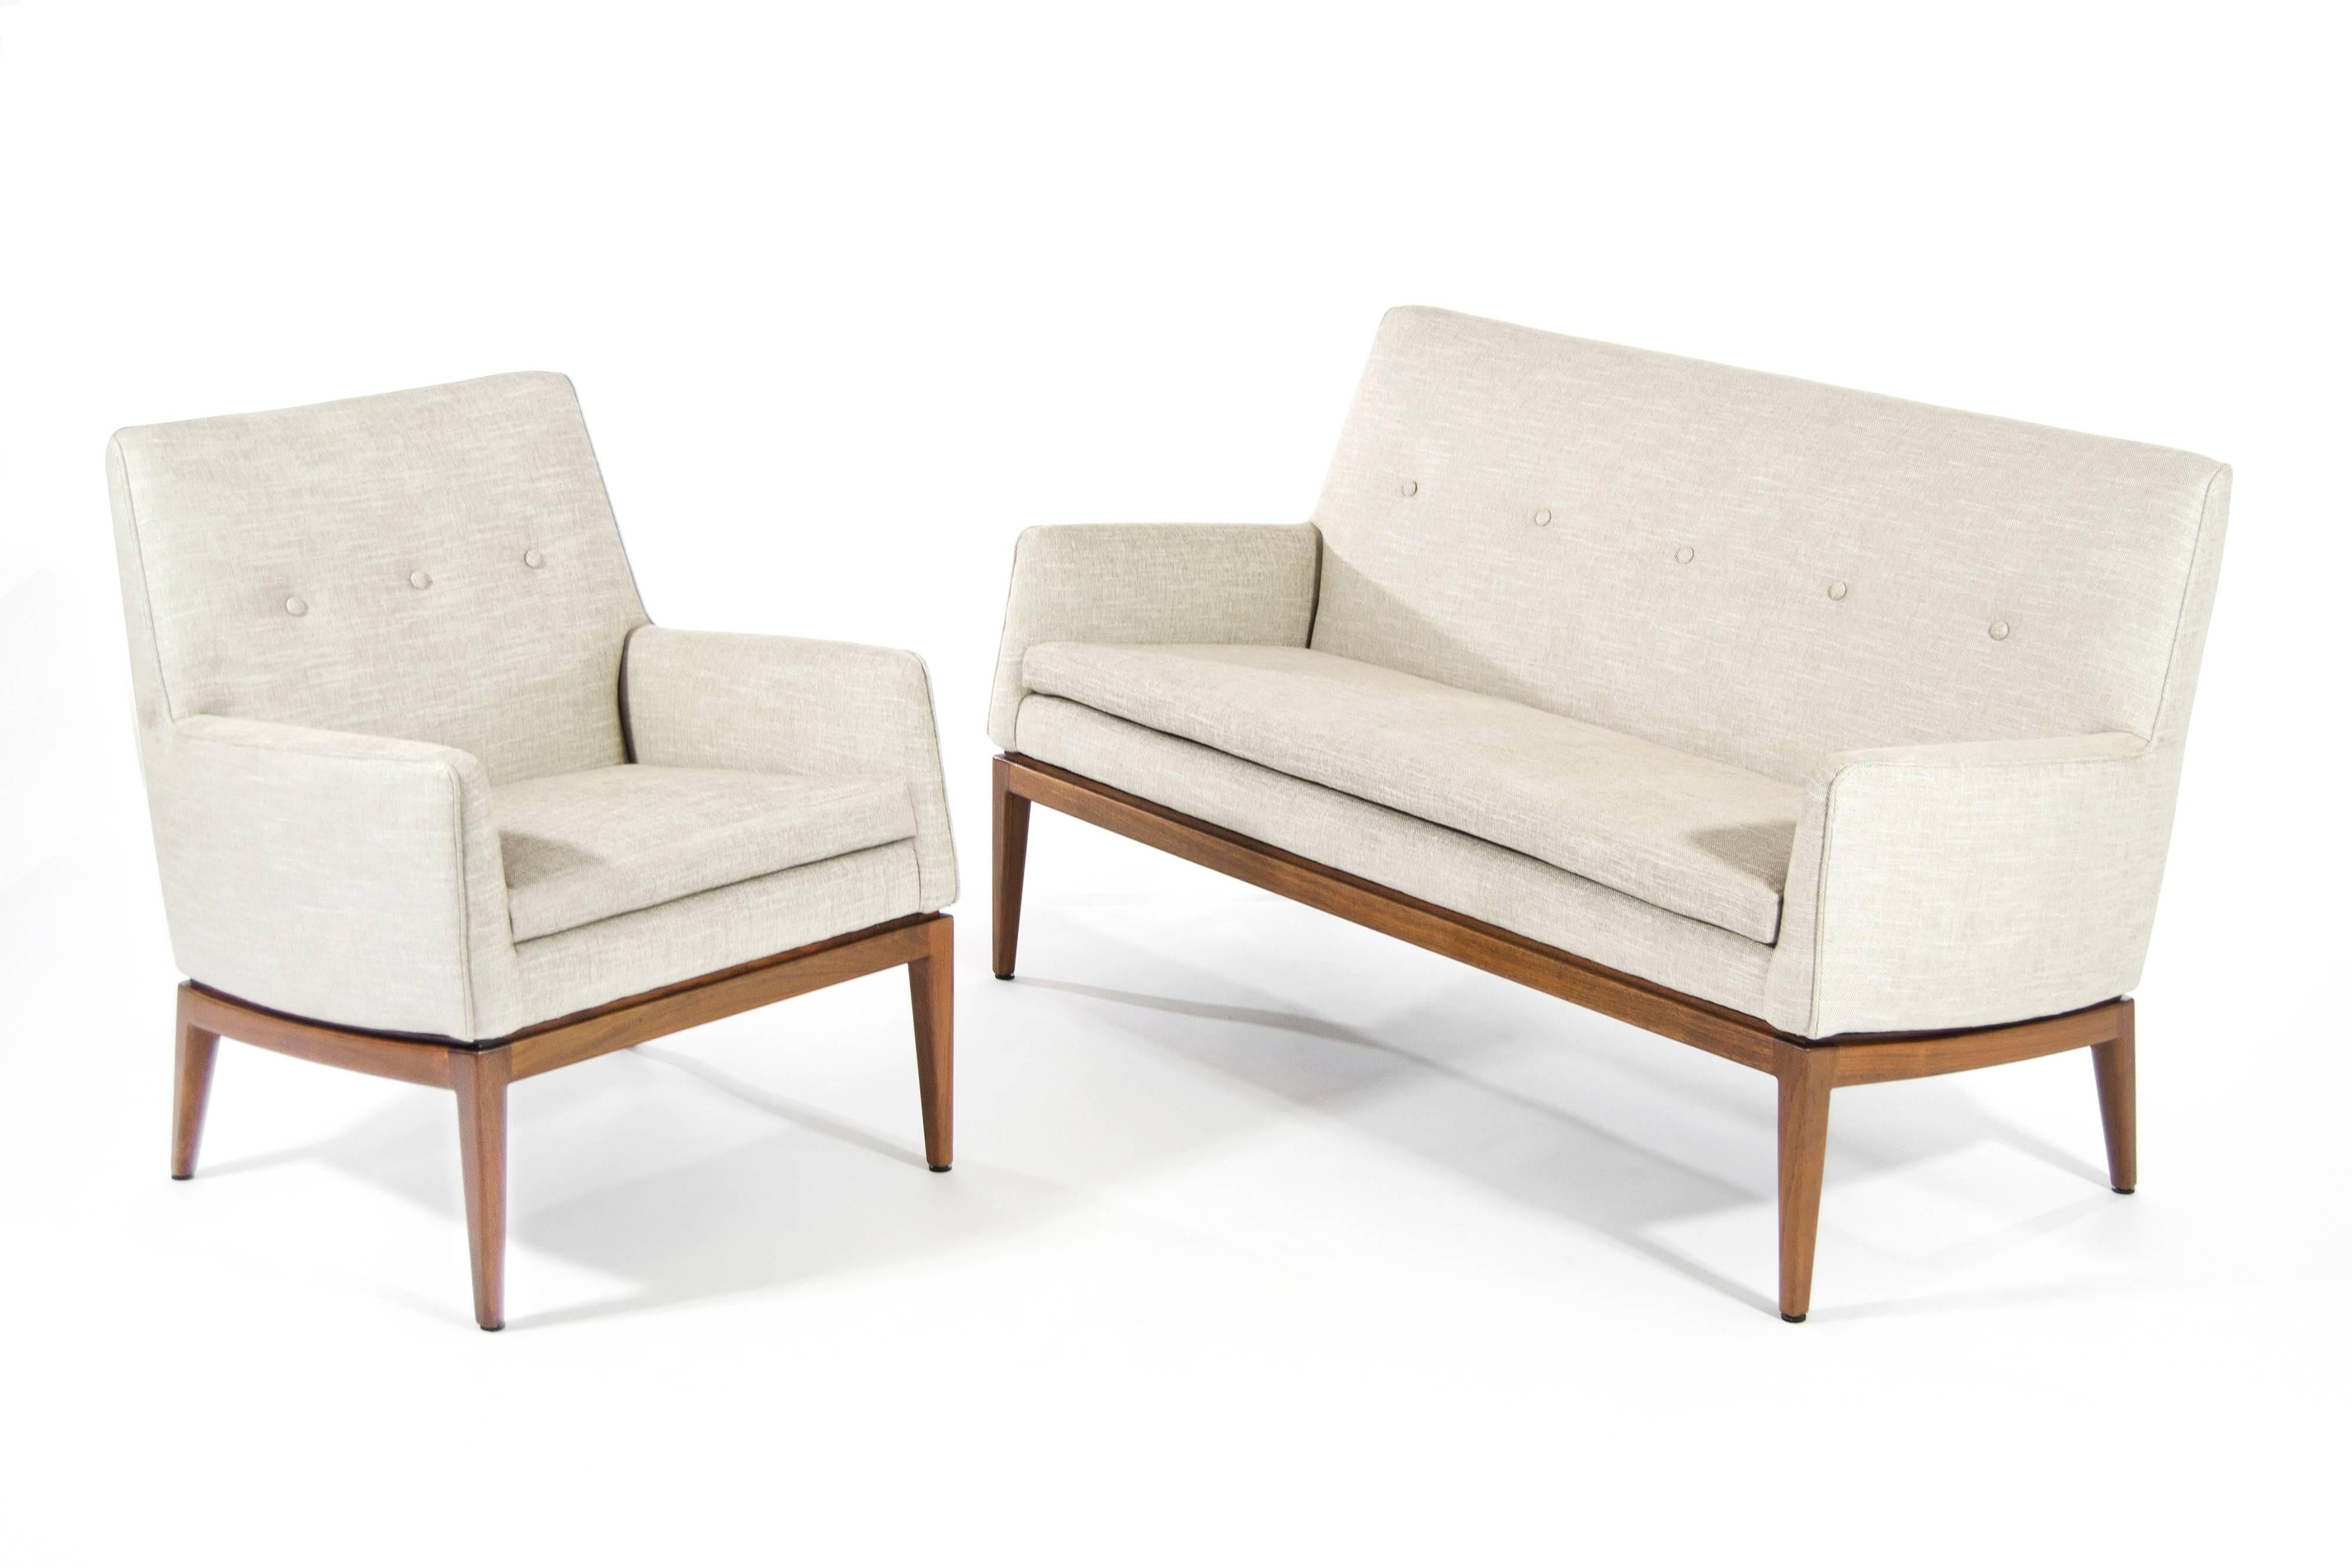 Loveseat and lounge chair by Jens Risom for Jens Risom design. Newly upholstered in linen, walnut bases fully restored.

Priced as set but also available individually. 

Chair dimensions: Height 31